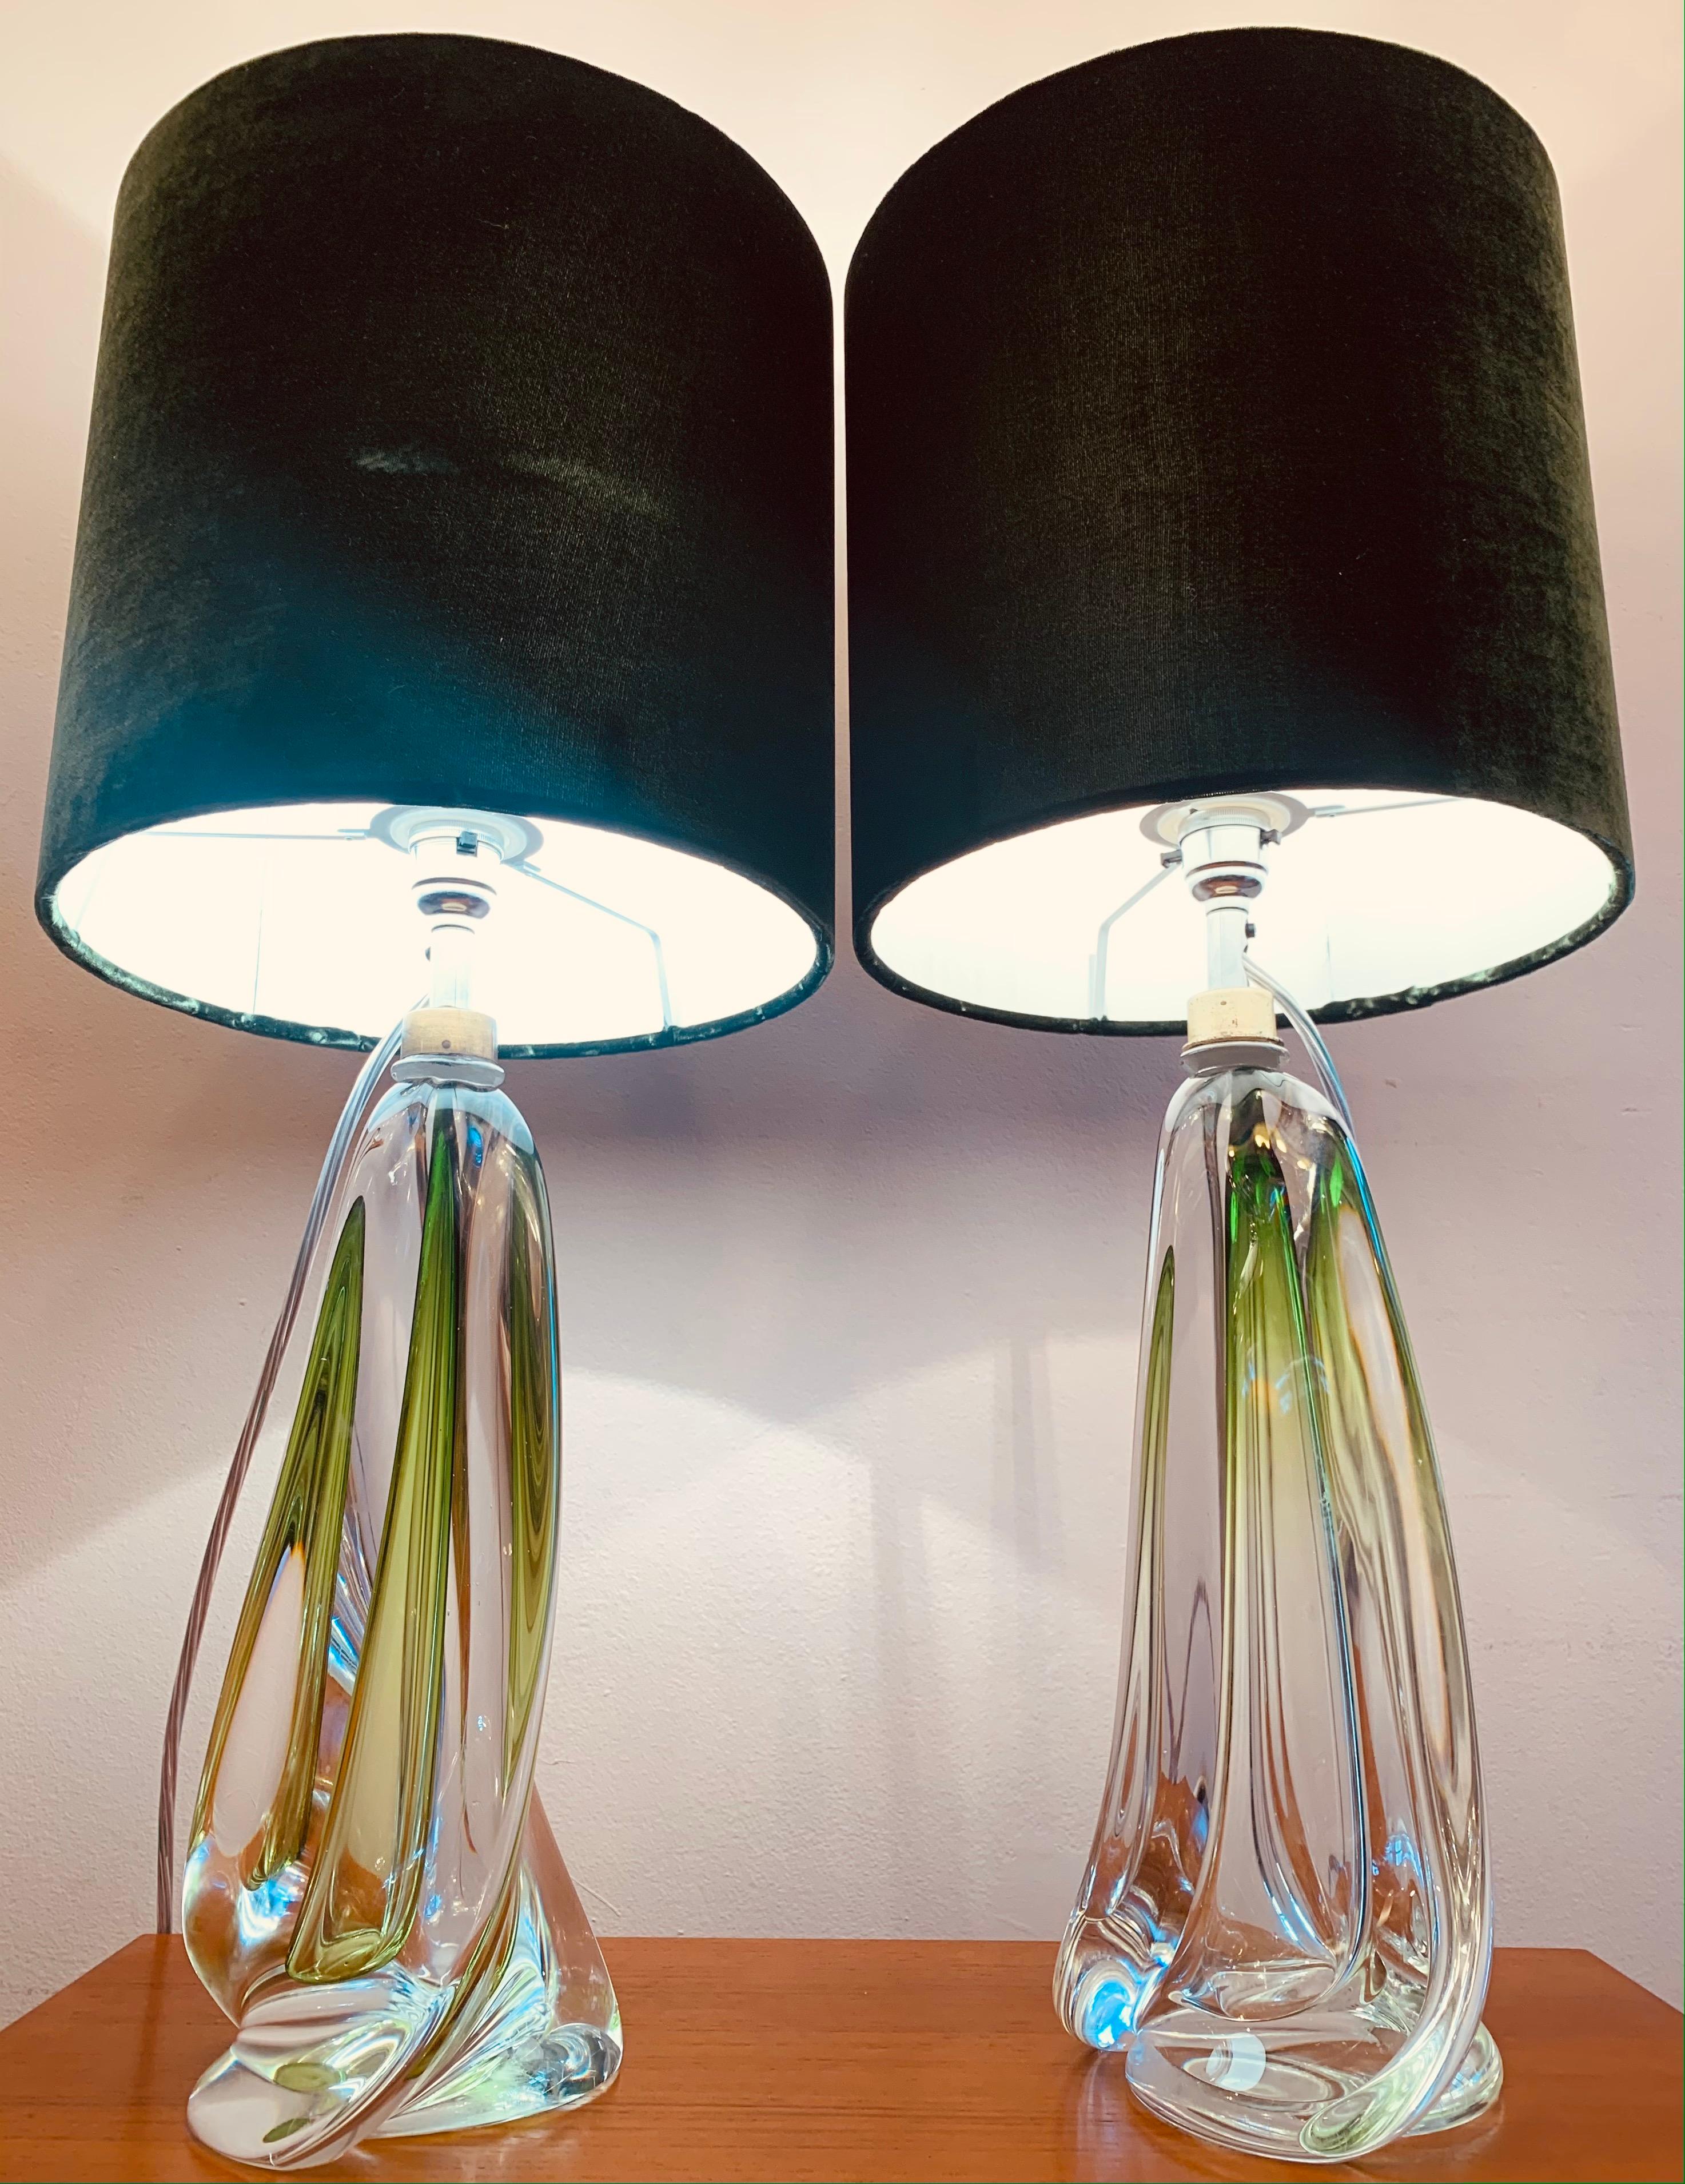 Pair of 1950s Val Saint Lambert pale green and clear glass crystal lamp bases of tapering geometric form with the new chrome mounted light fittings. handmade in heavy lead crystal glass in Belgium which makes every one slightly different to the